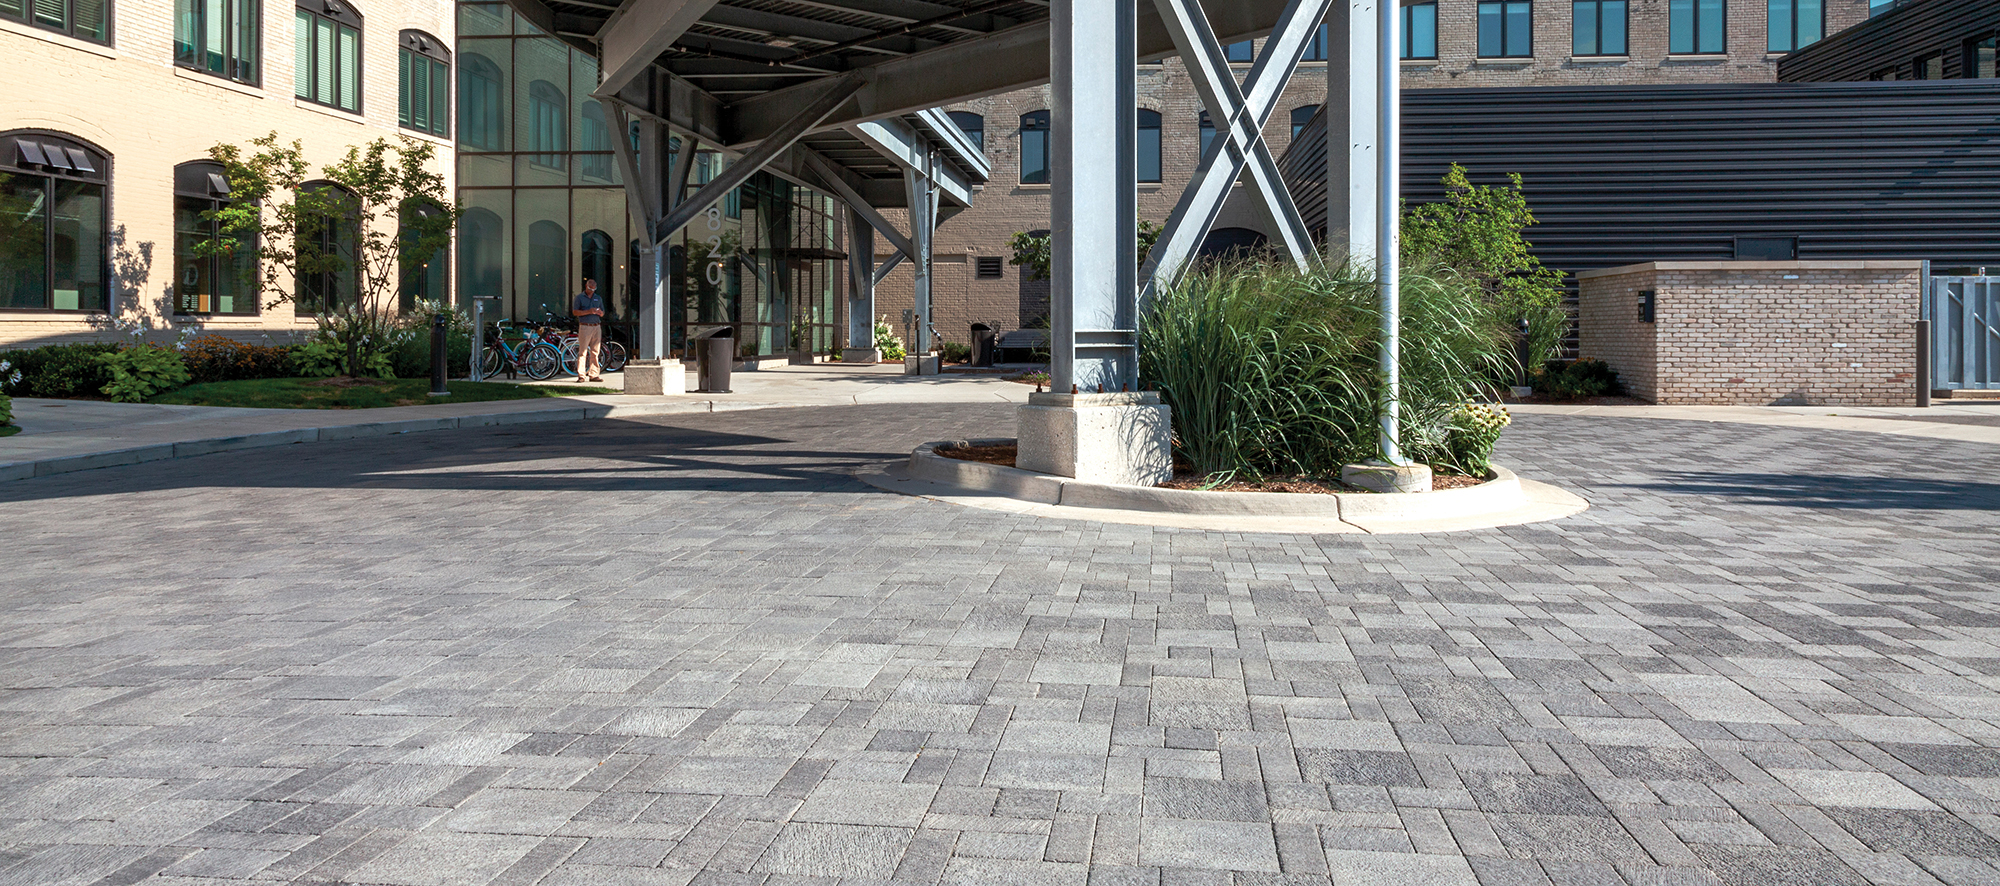 In front of 616 Lofts on Monroe is a circular driveway made from Unilock Il Campo pavers in shades of grey, and a loading shelter.